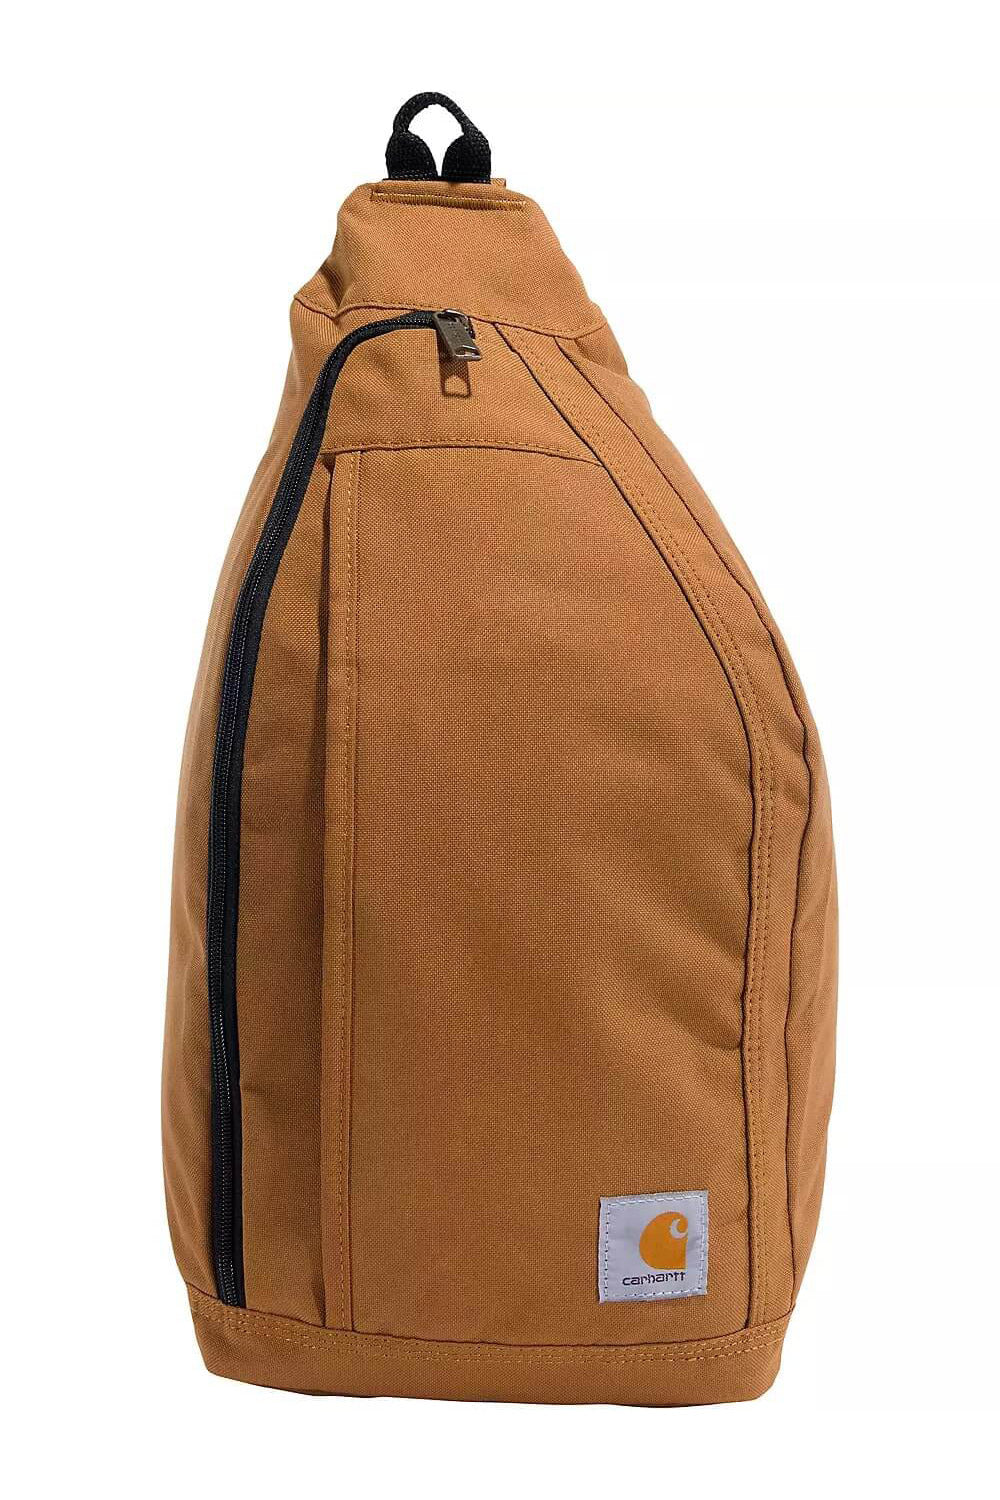 Reworked Carhartt Sling Bag ₱1500 each Available in-store and